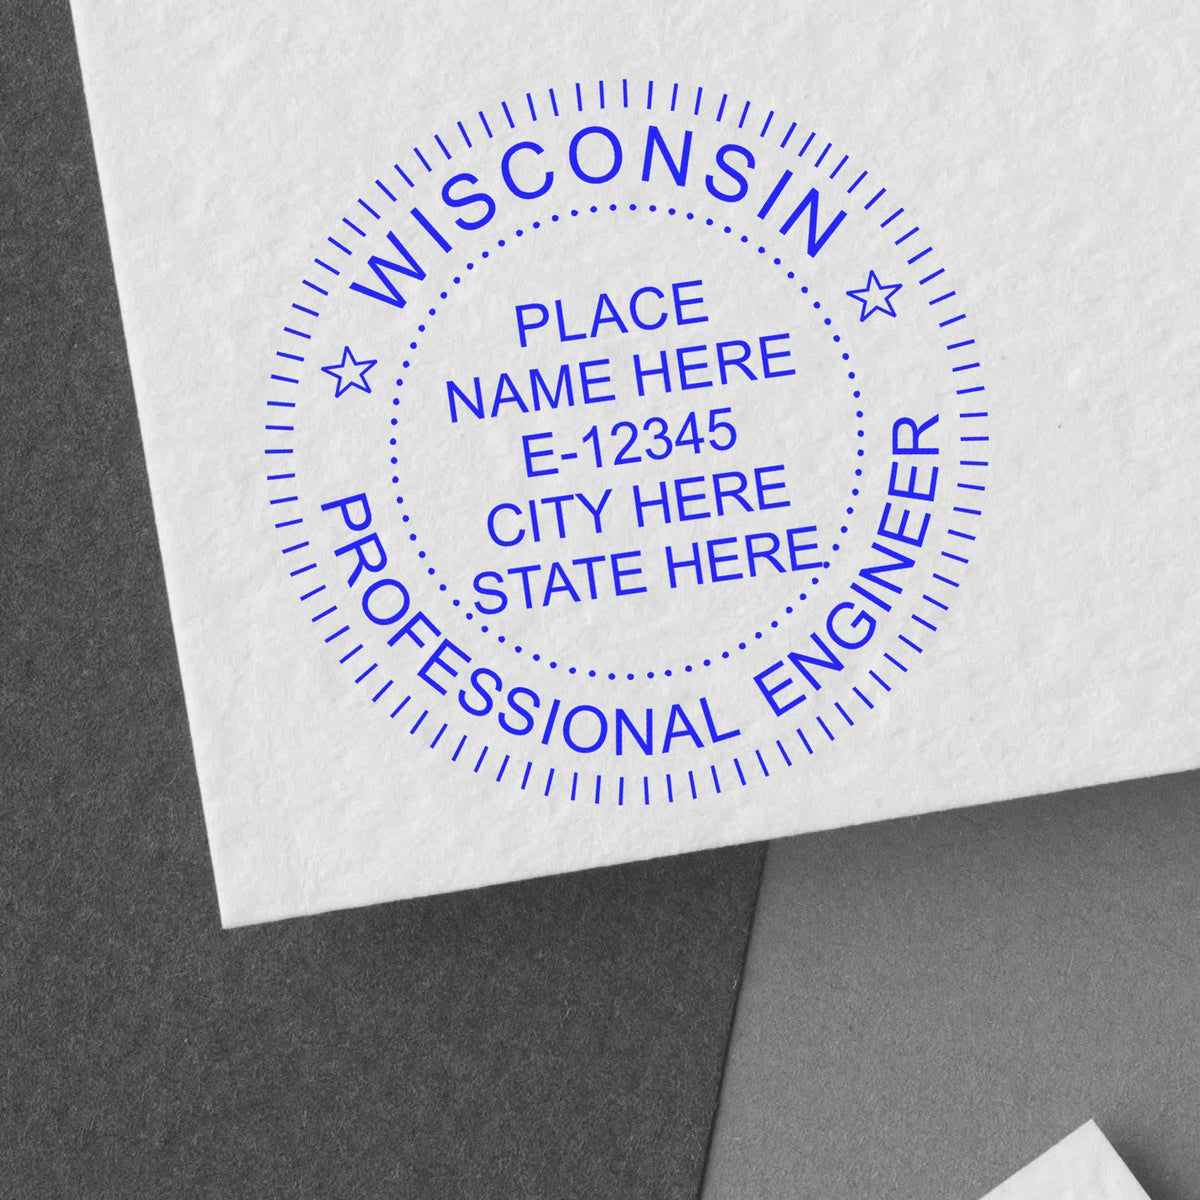 The Self-Inking Wisconsin PE Stamp stamp impression comes to life with a crisp, detailed photo on paper - showcasing true professional quality.